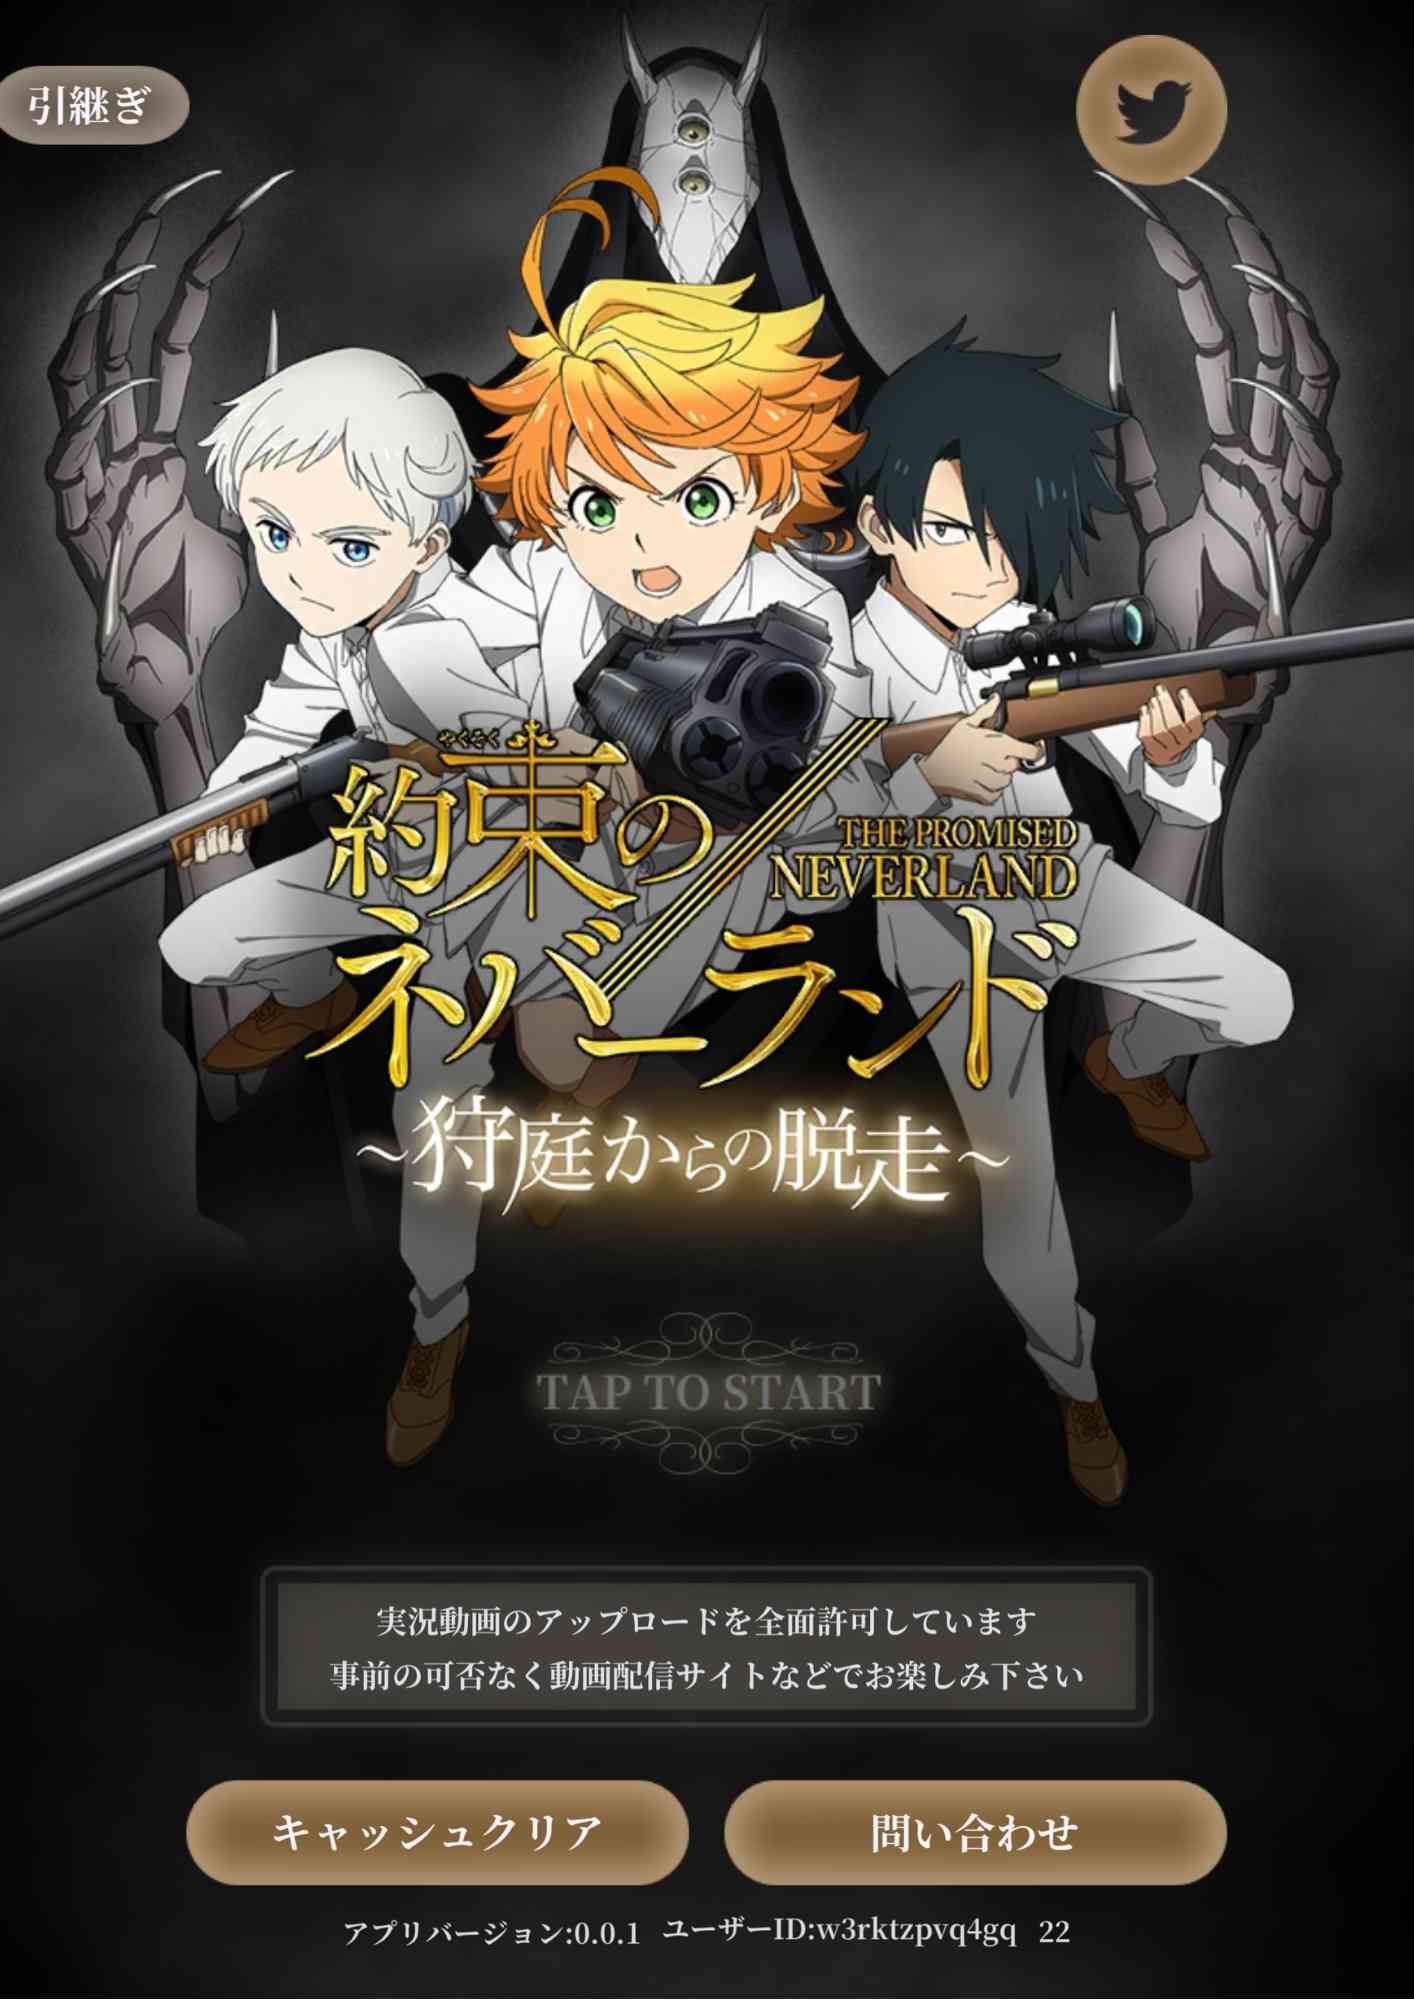 Download The Promised Neverland on Android iOS